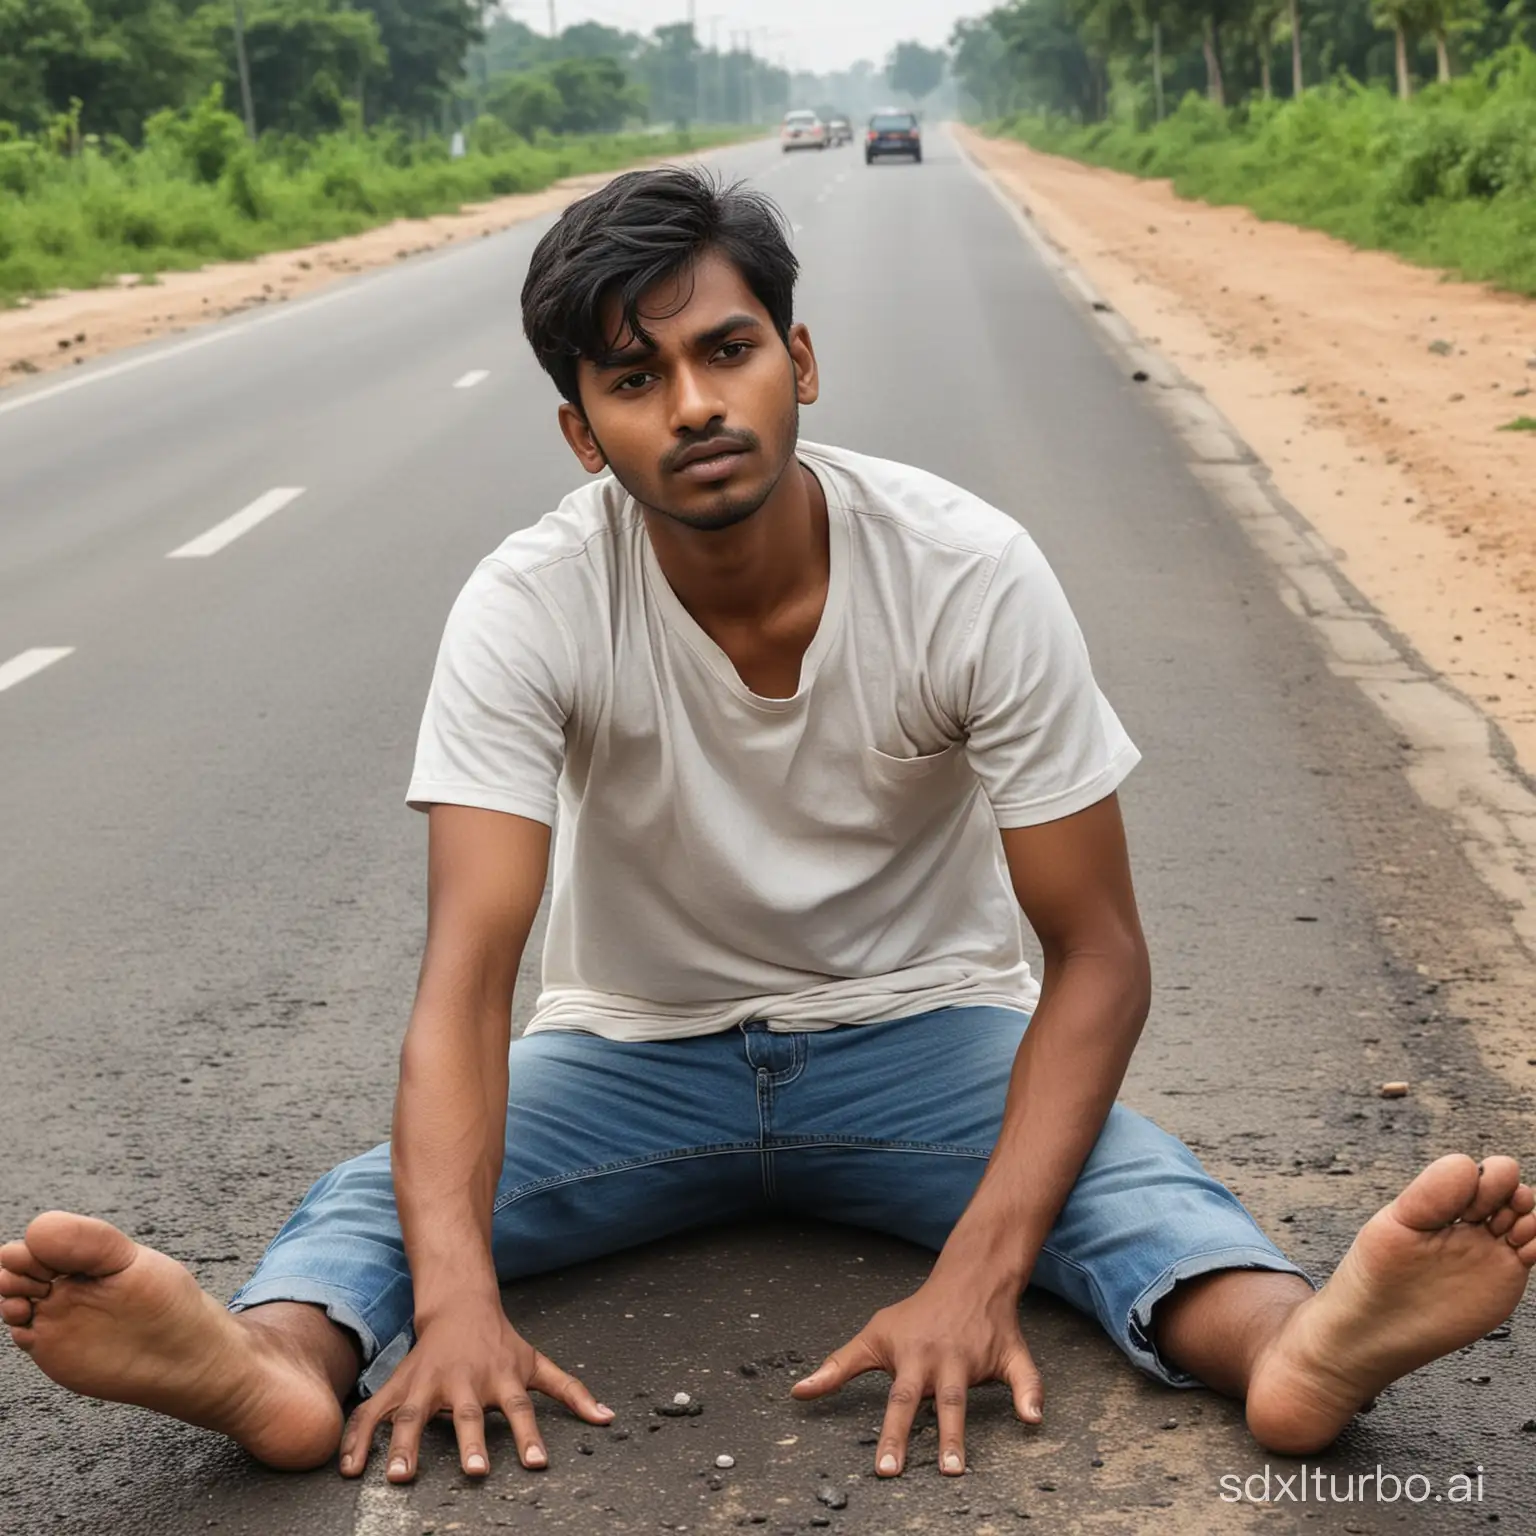 Young-Indian-Man-Injured-in-Road-Accident